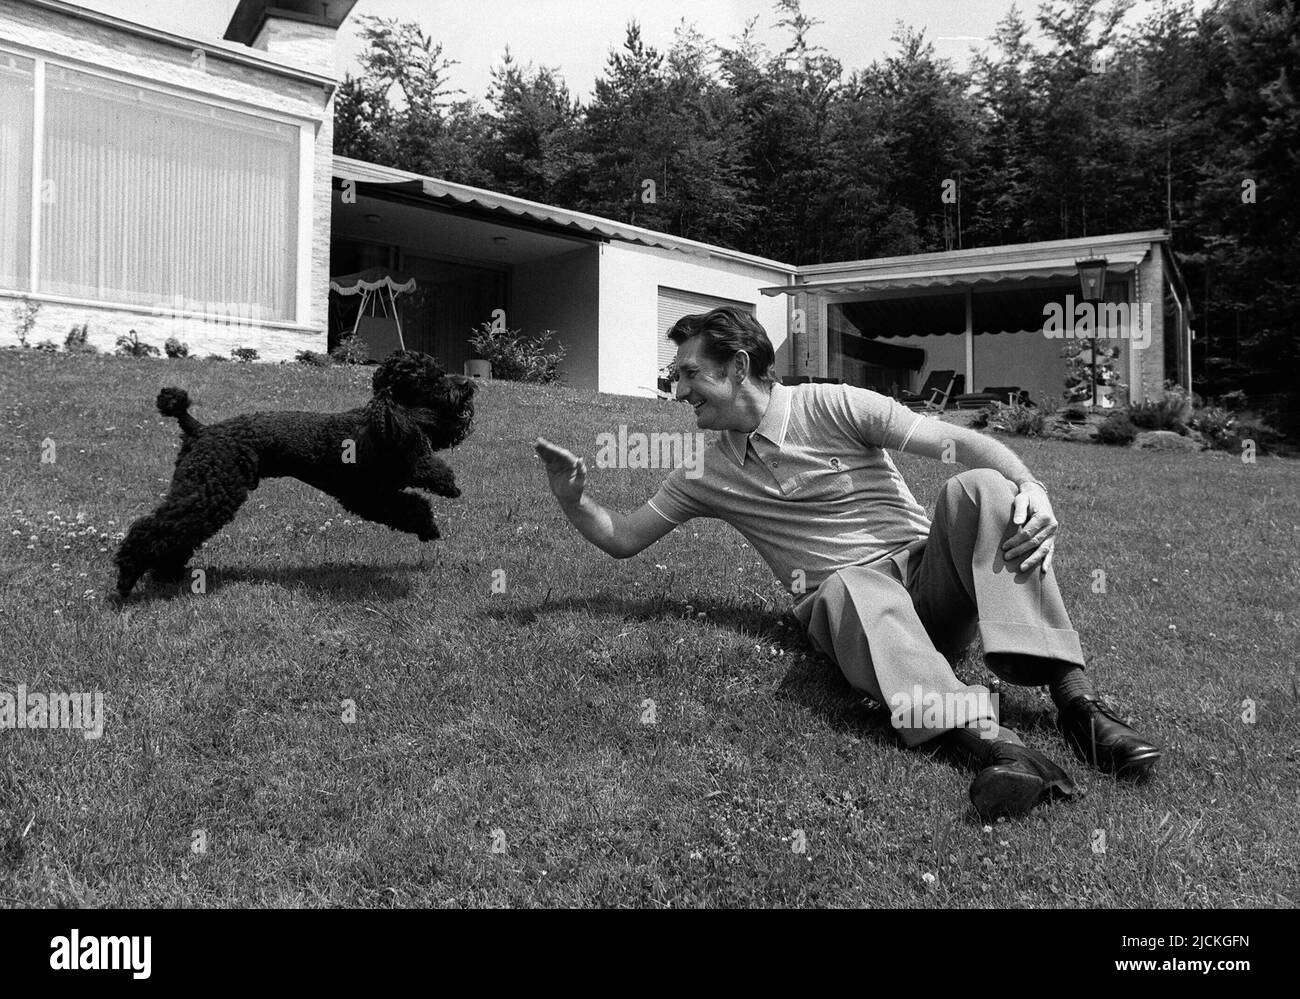 ARCHIVE PHOTO: 20 years ago, on June 17, 2002, soccer legend Fritz Walter died, 05SN FRITZWALTER.jpg Fritz WALTER, Germany, former soccer player, soccer world champion from 1954, plays with his dog Ariow in the garden of his house, sitting on the pitch , whole figure, 02/25/1990. Stock Photo